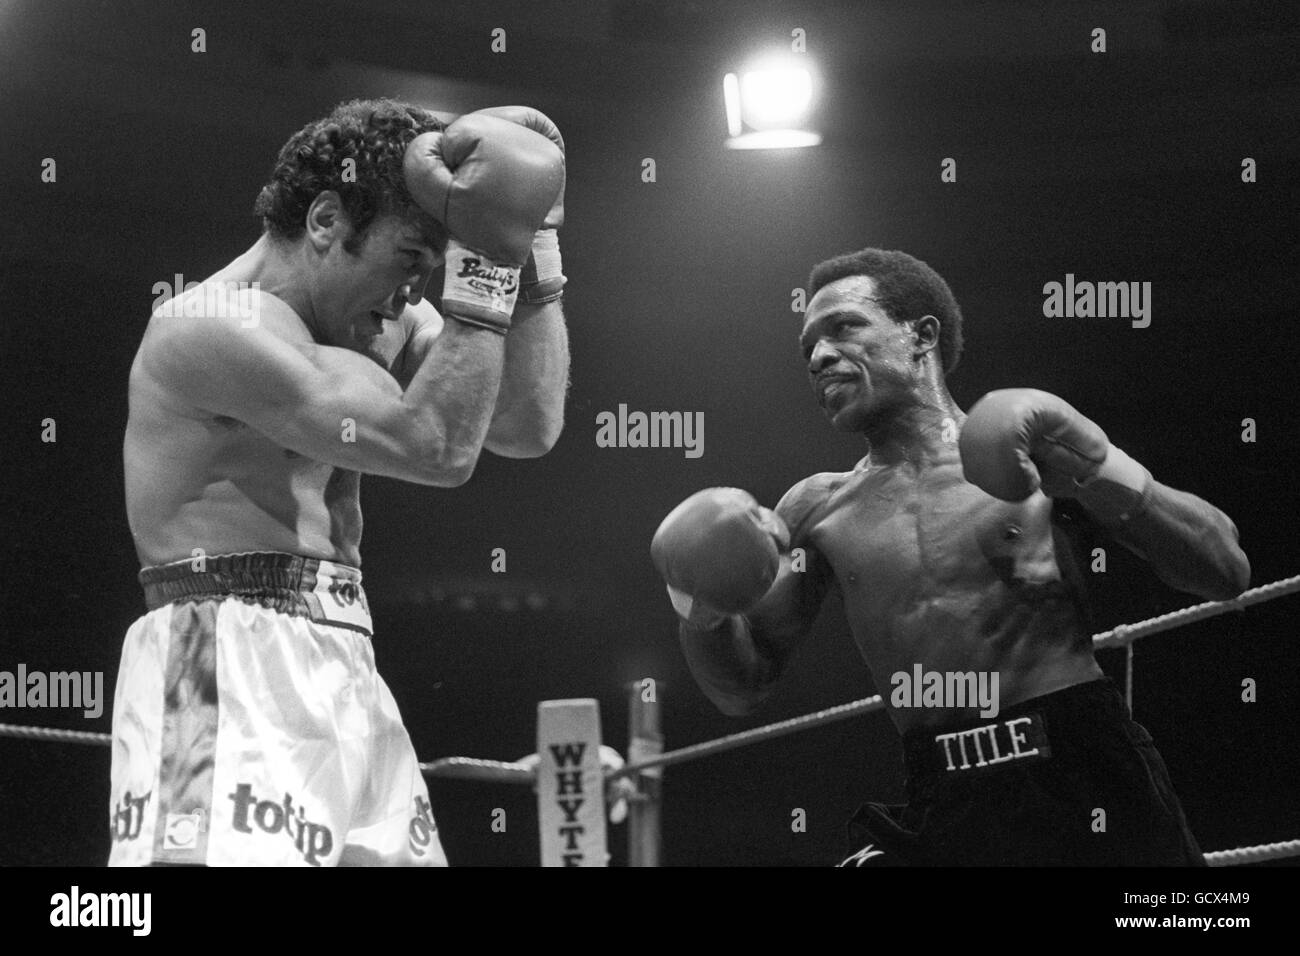 Boxing - WBC Light Middleweight Title - Maurice Hope v Rocky Mattioli - Conference Centre, Wembley Stock Photo